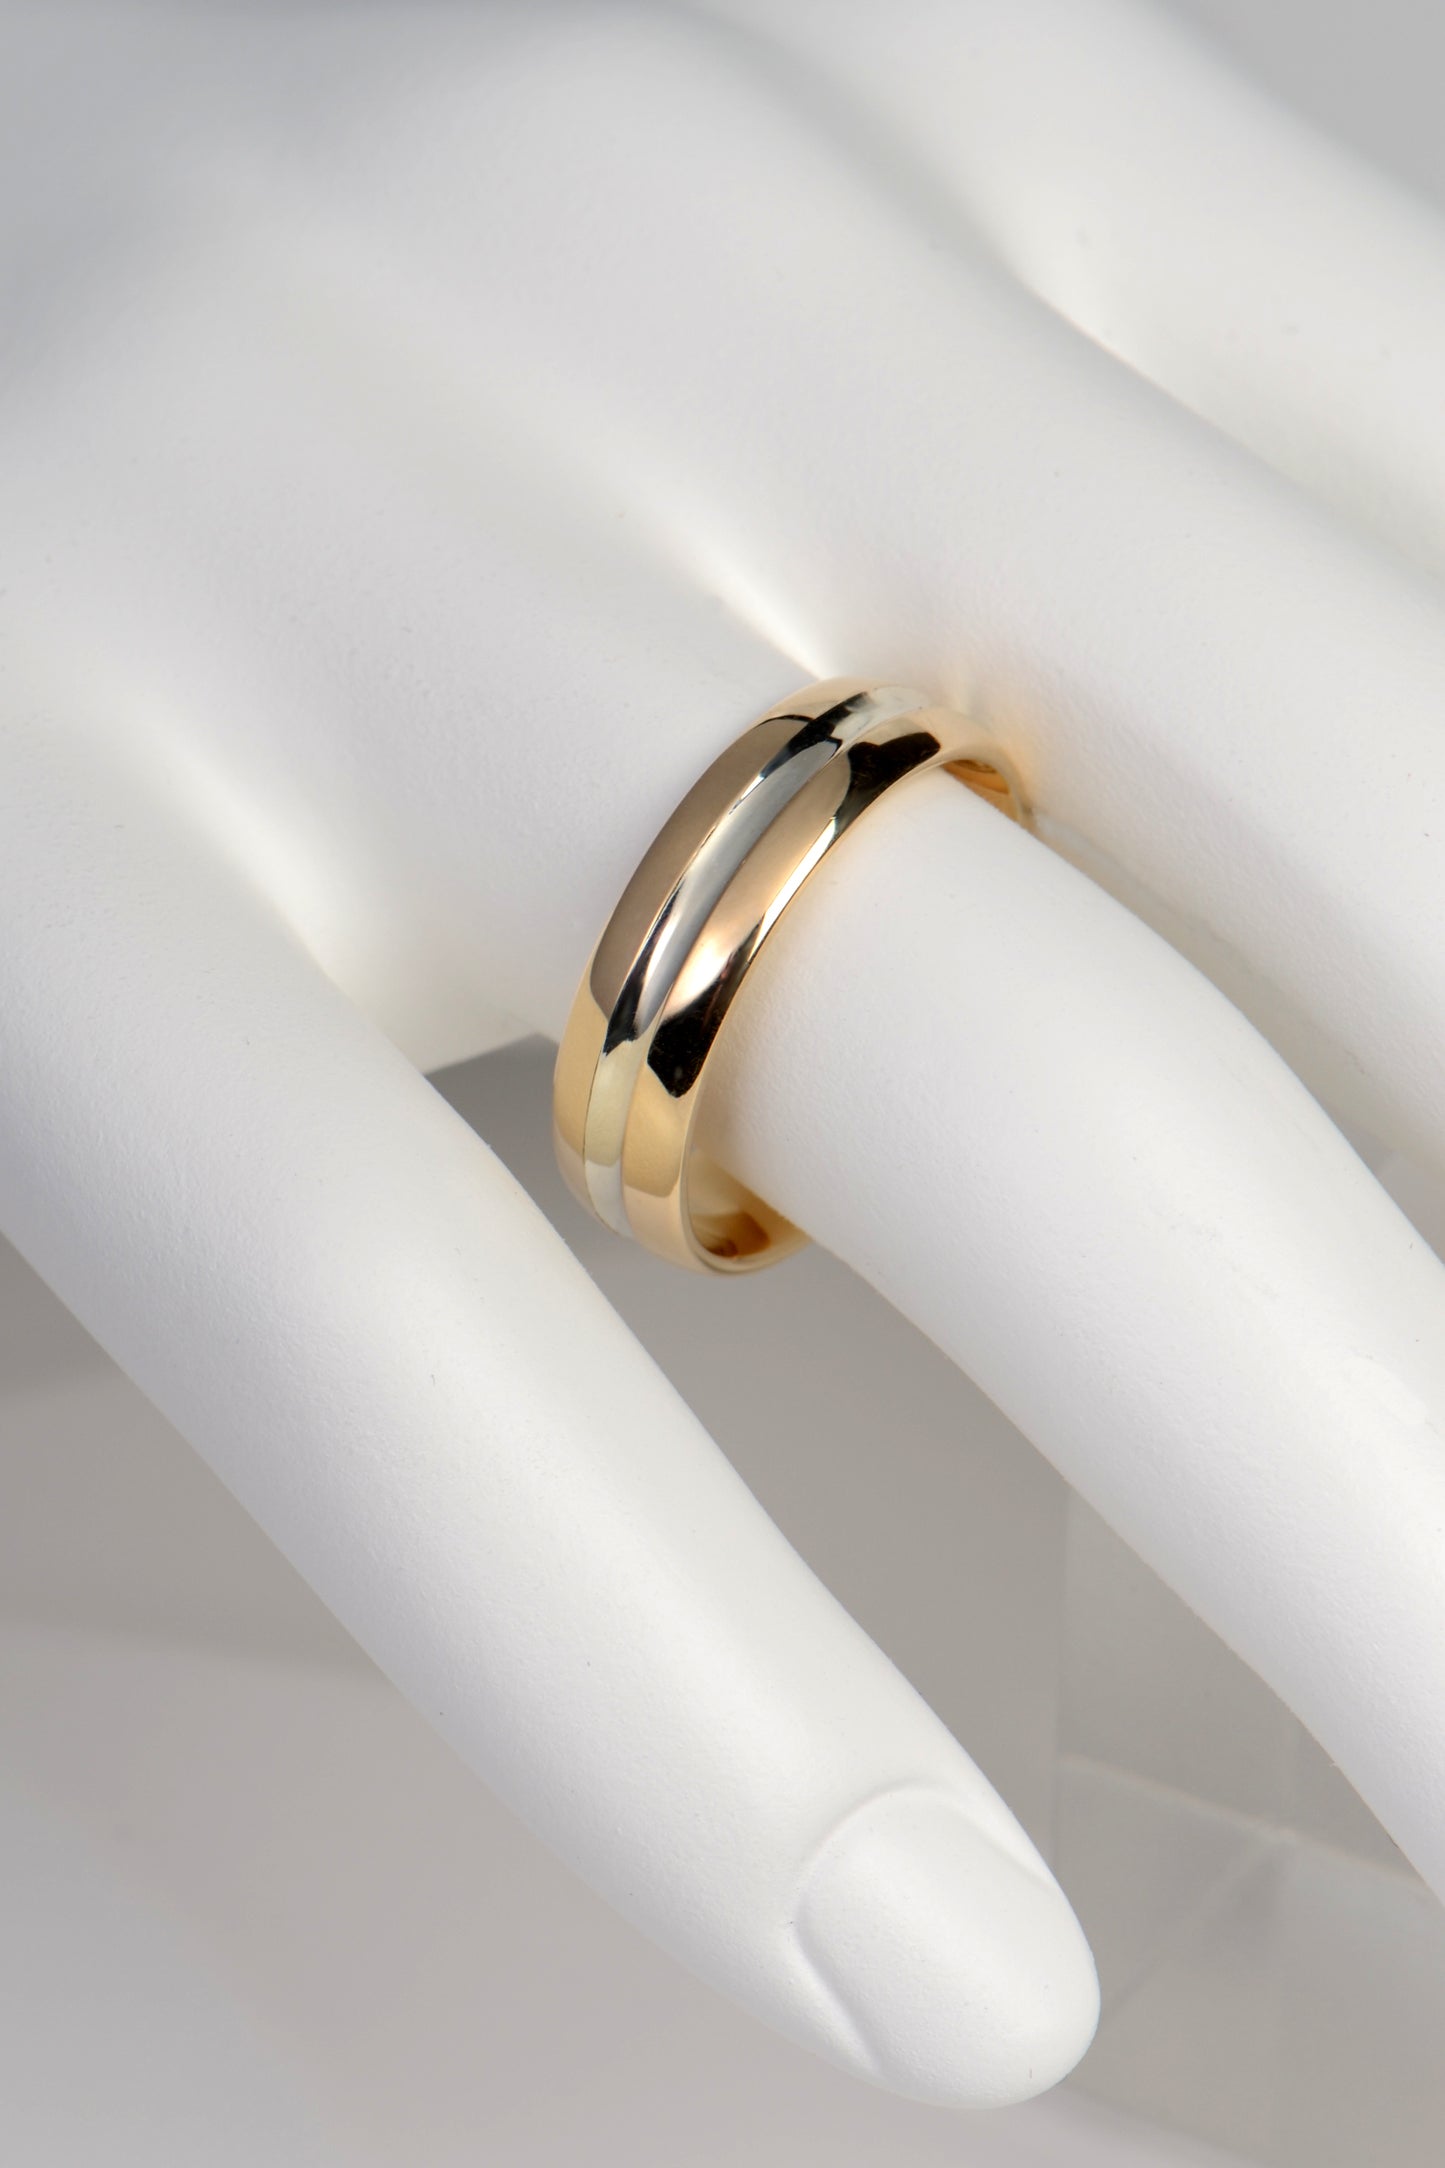 6mm wide two colour gold wedding band